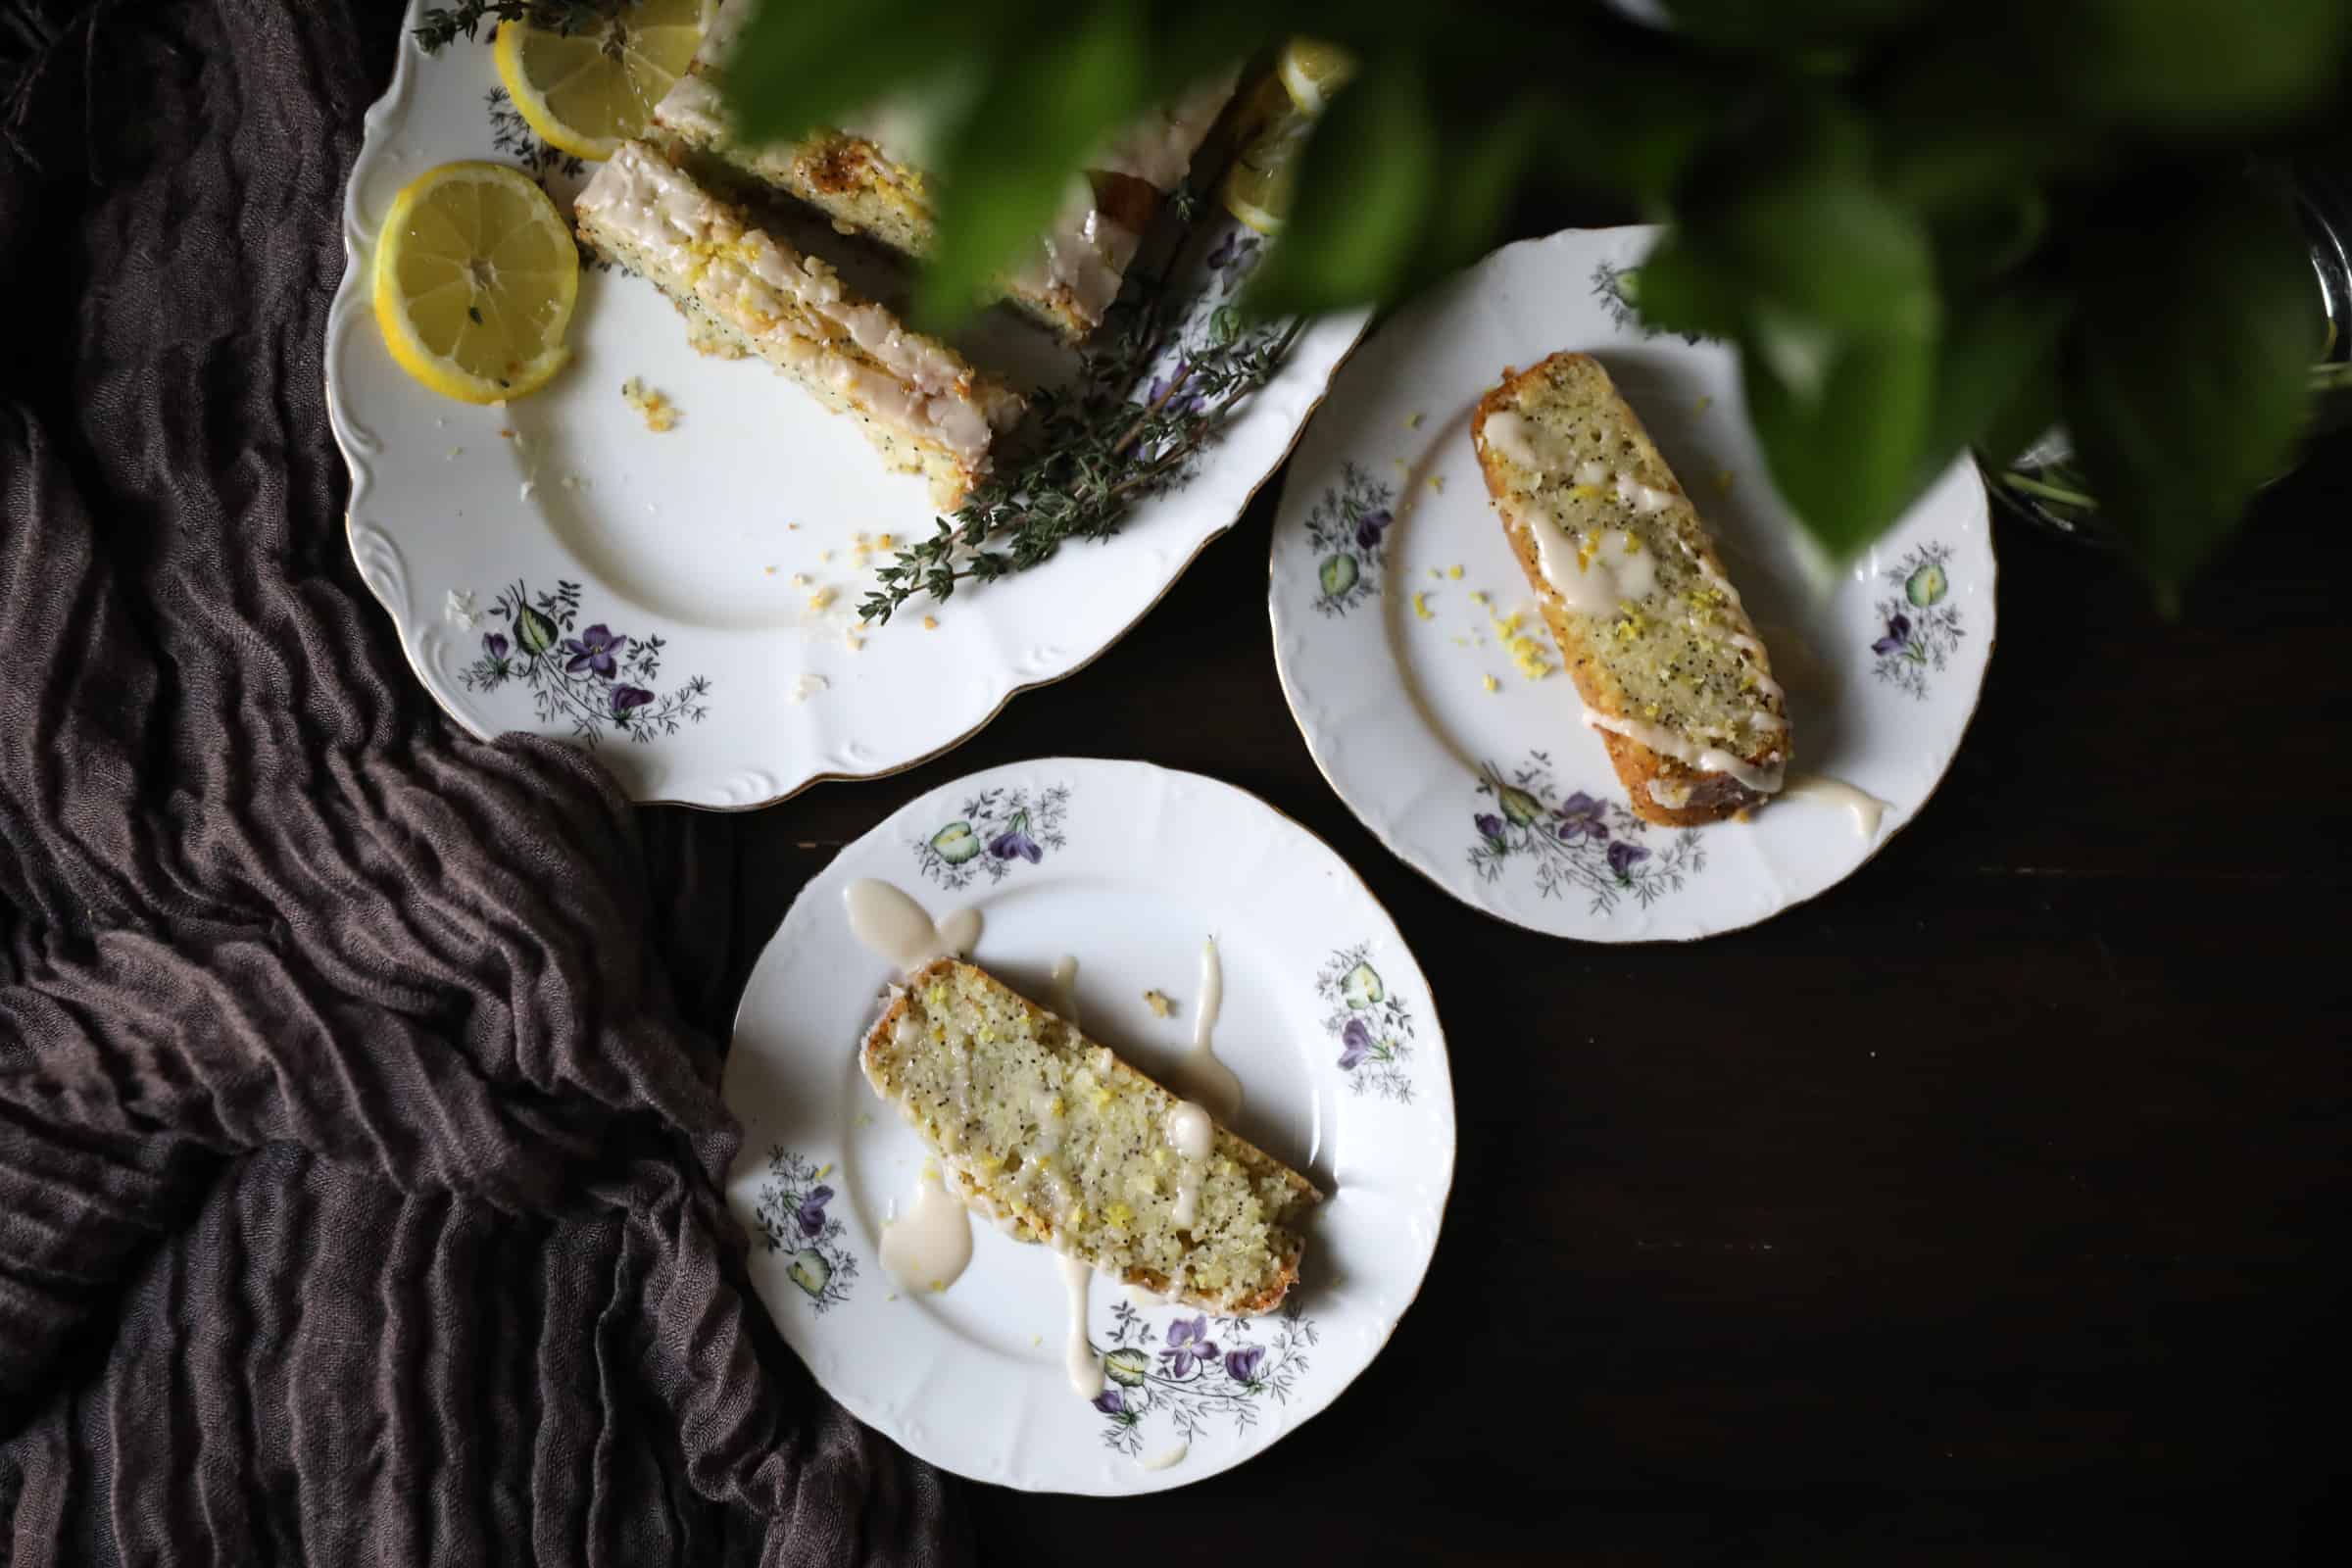 A group of plates with lemon poppy seed loaf slices